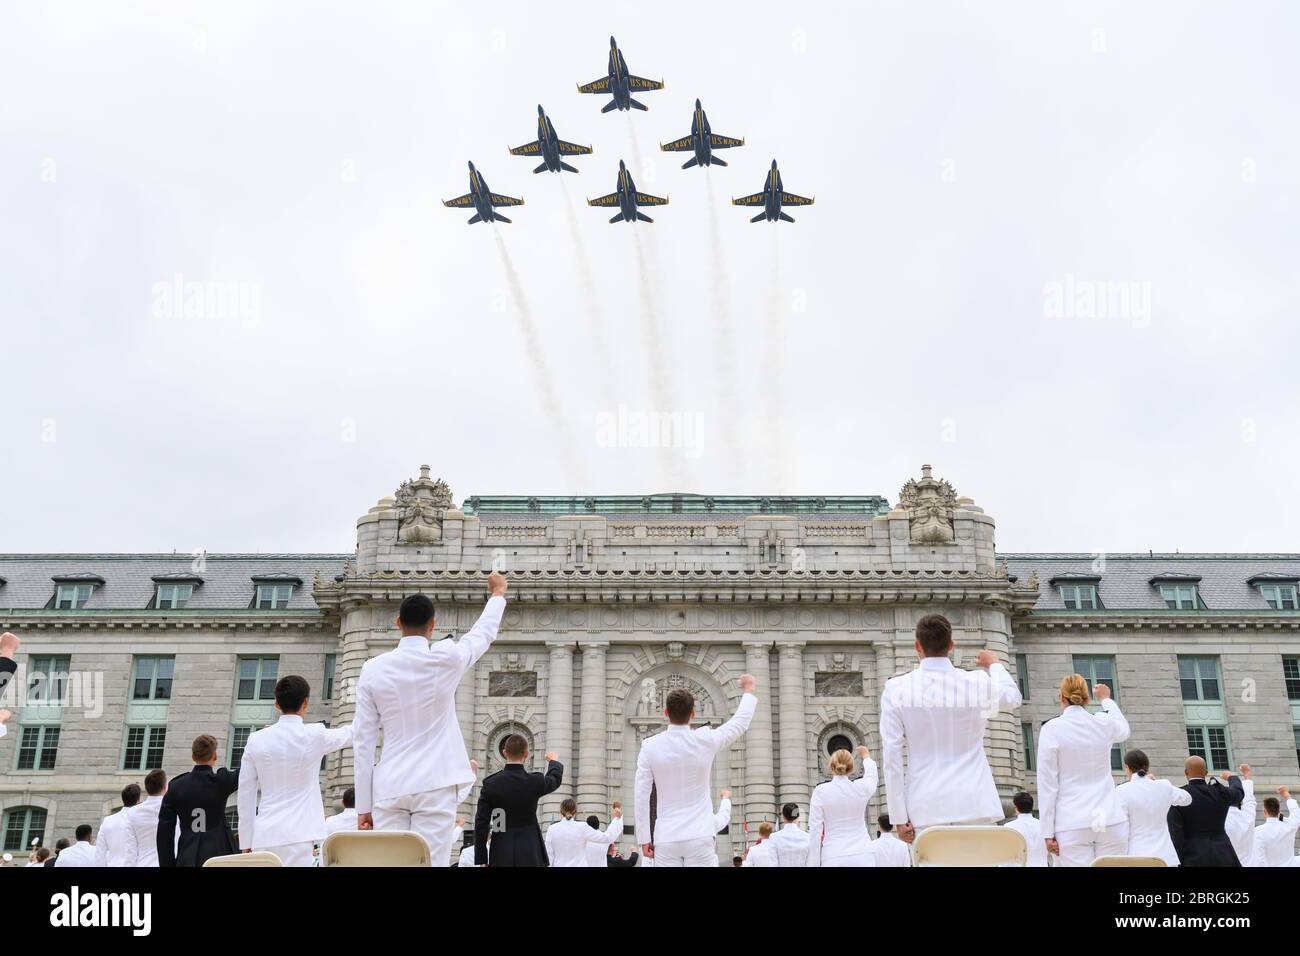 Annapolis, United States Of America. 20th May, 2020. Annapolis, United States of America. 20 May, 2020. The U.S. Navy Flight Demonstration Squadron, the Blue Angels, fly over Bancroft Hall at the conclusion of the fifth swearing-in event for the Naval Academy Class of 2020 under COVID-19, coronavirus pandemic social distancing rules May 20, 2020 in Annapolis, Maryland. Approximately 1,000 midshipmen will graduate and be sworn-in during five events and one virtual ceremony. Credit: Dana Legg/DOD Photo/Alamy Live News Stock Photo